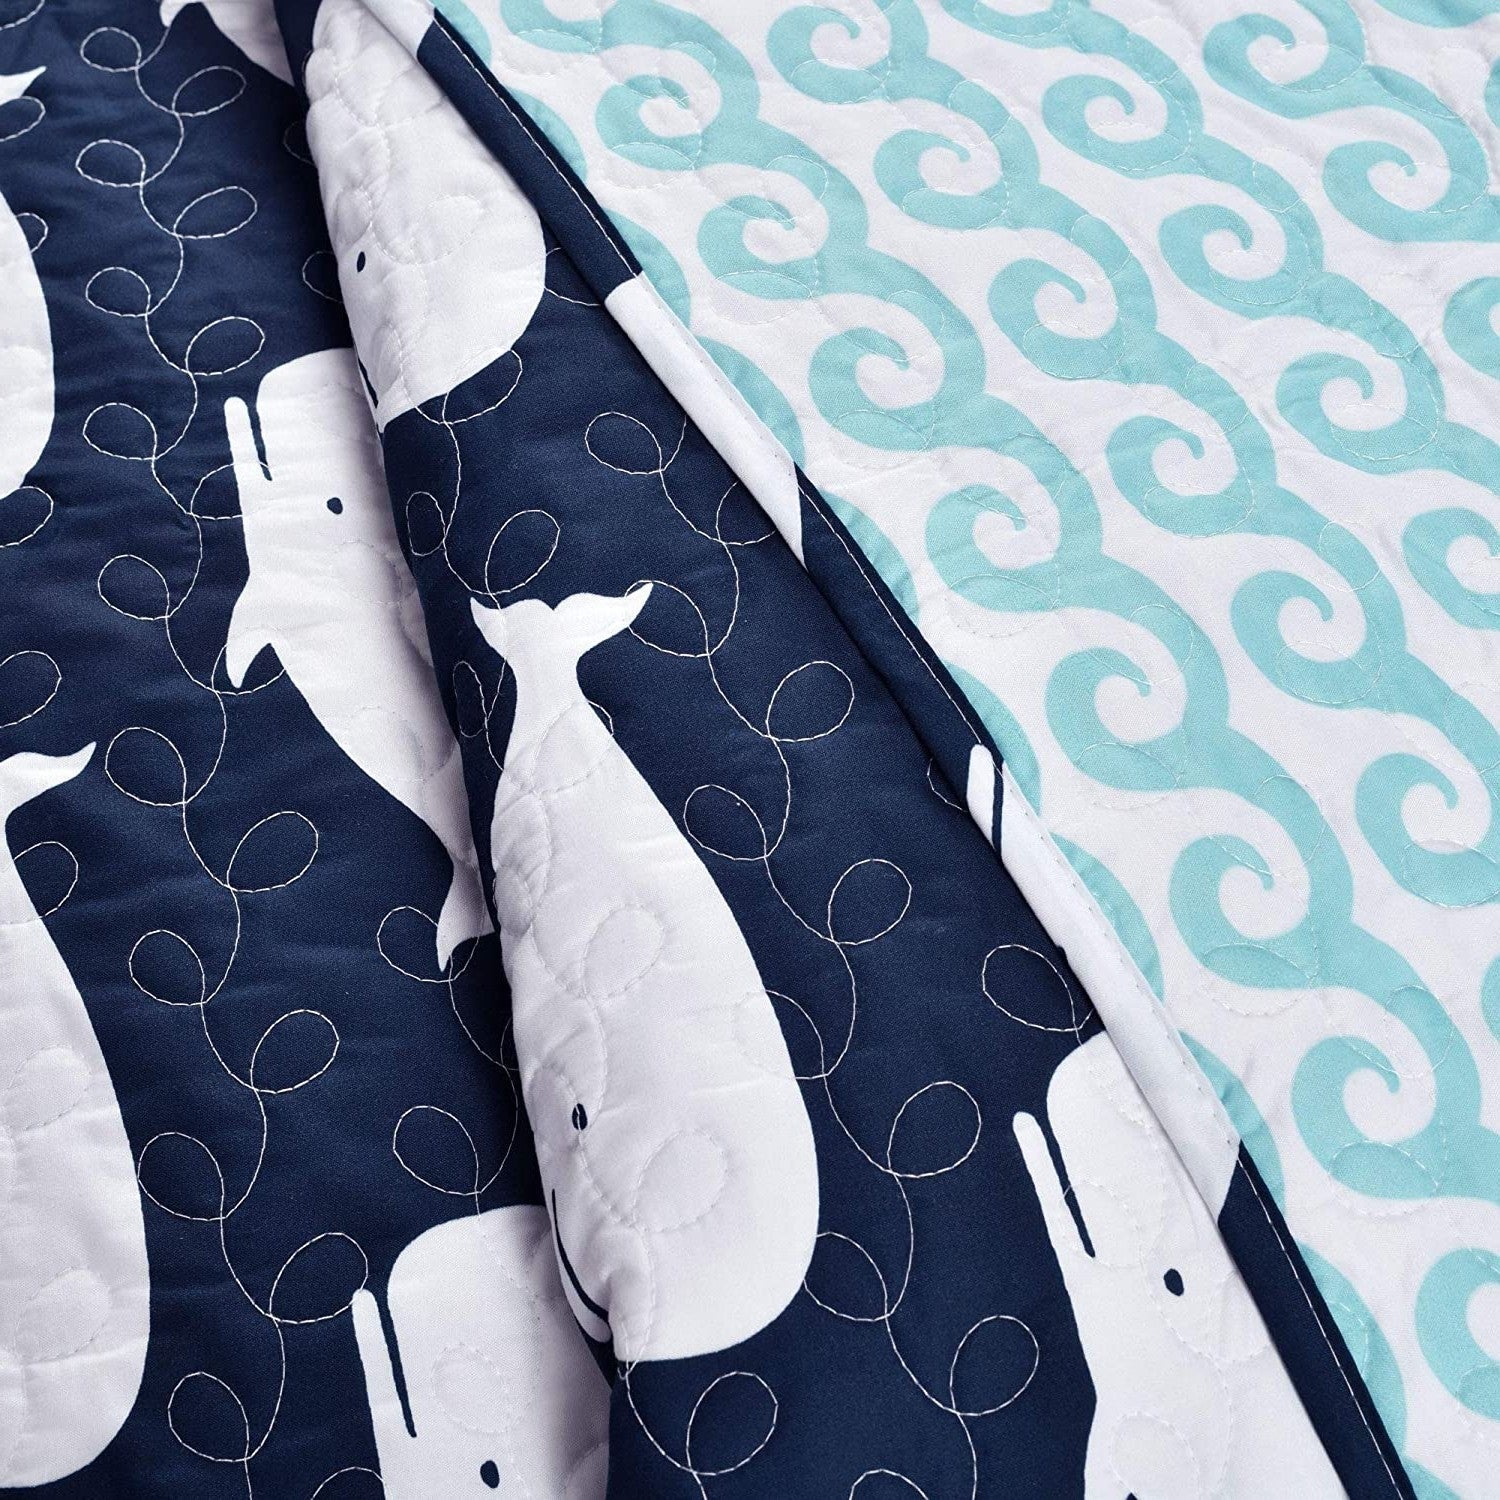 Bedroom > Quilts & Blankets - Full/Queen 5 Piece Bed In A Bag Navy Teal Microfiber Waves Whales Quilt Set